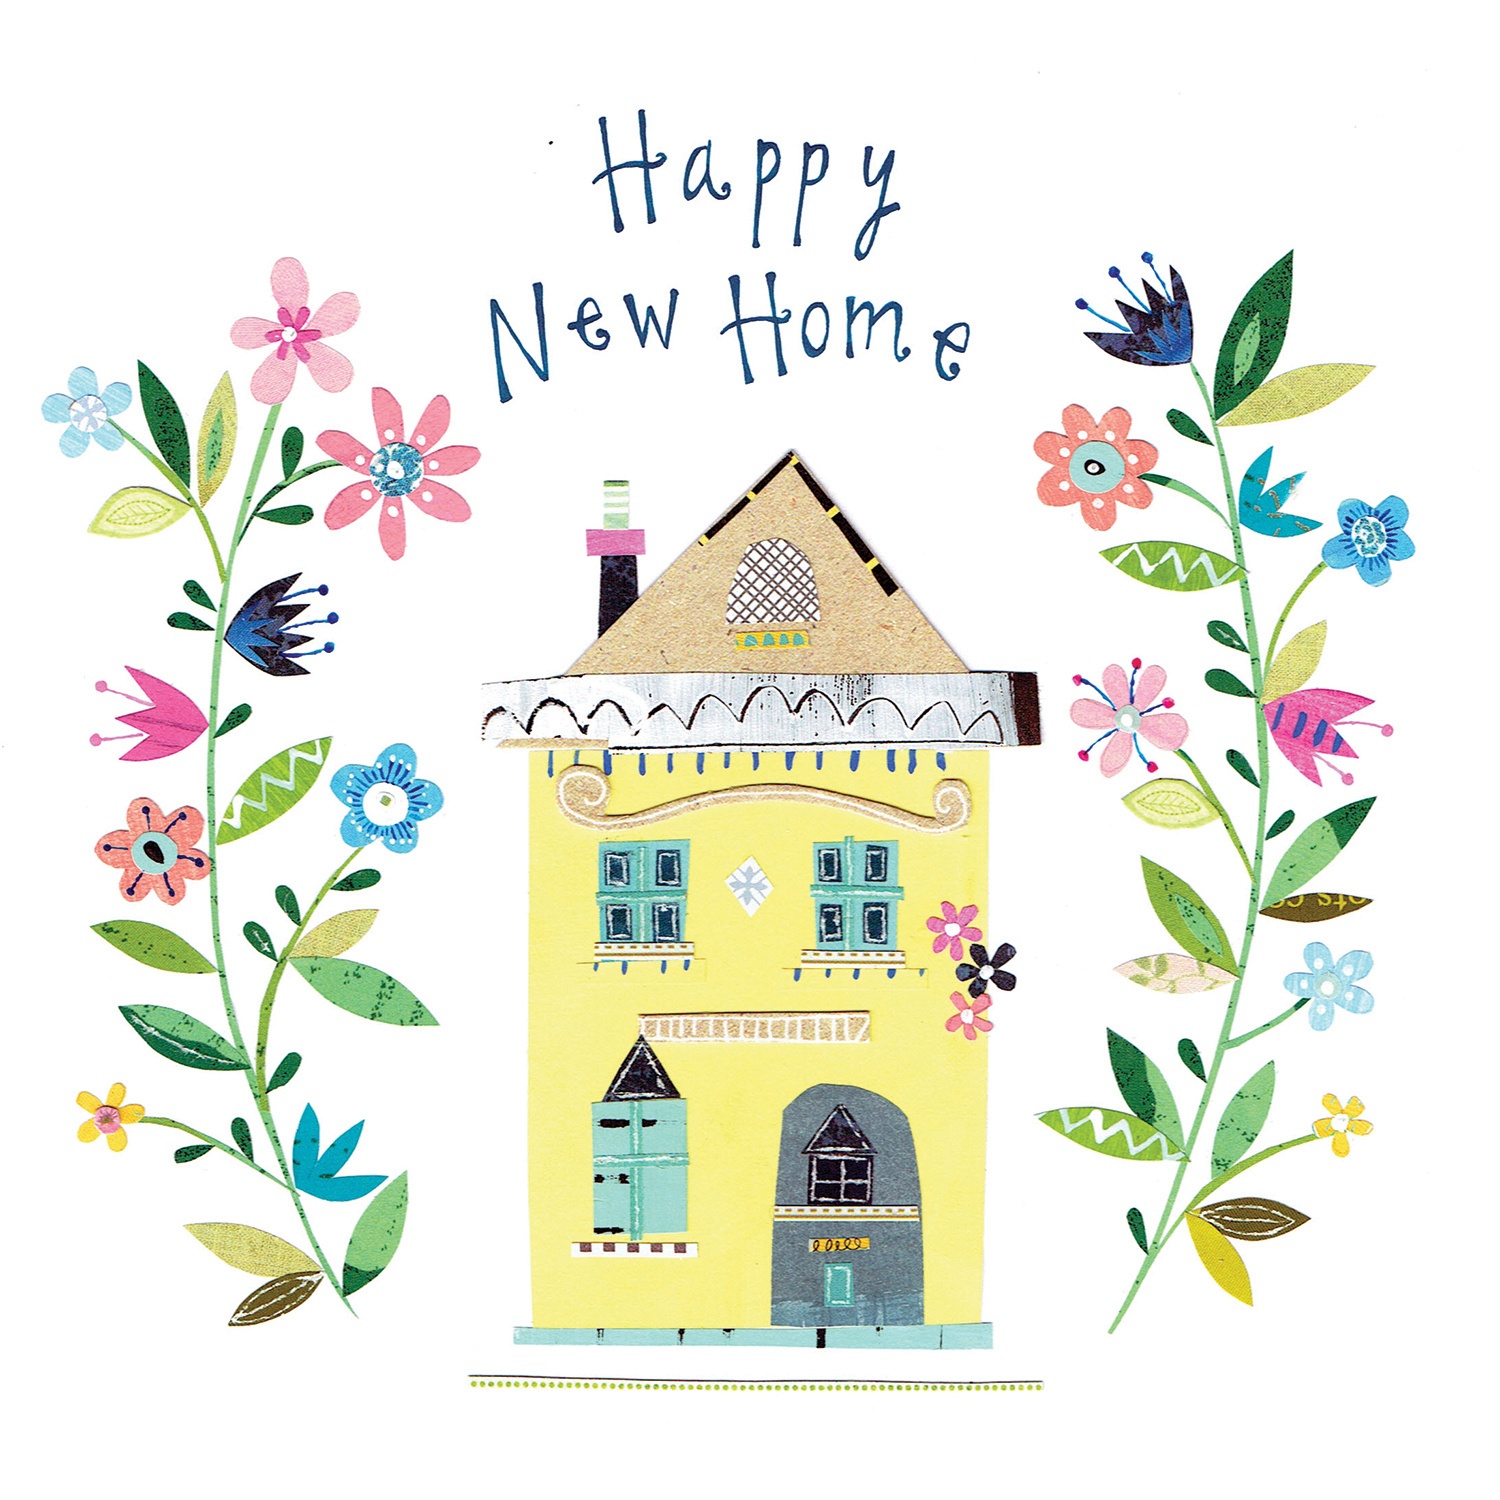 Happy New Home - Congratulations Card (Free) | Greetings Island - Welcome Home Cards Free Printable